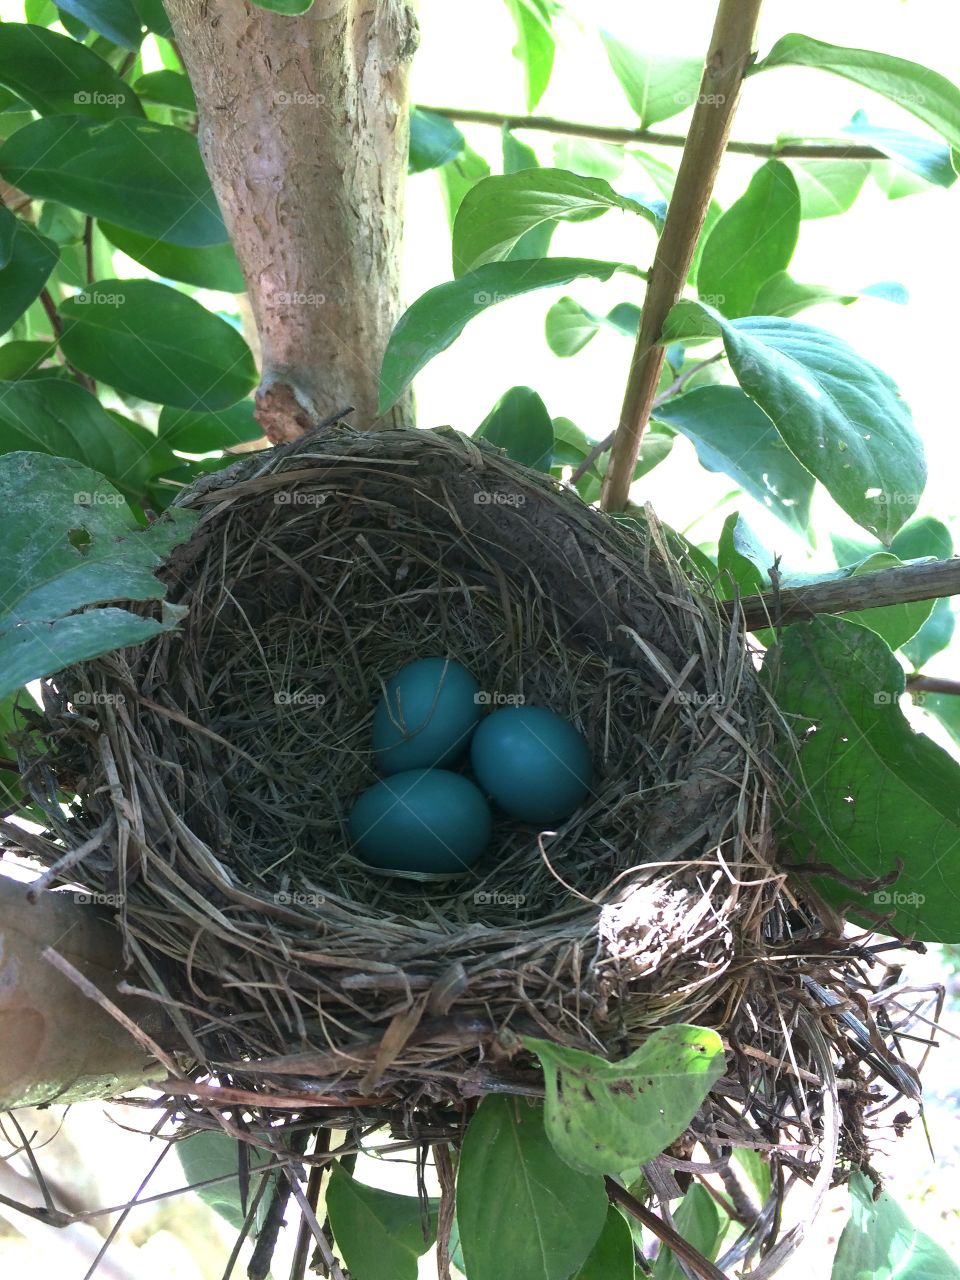 Robin's Eggs. I found this nest just outside my window!